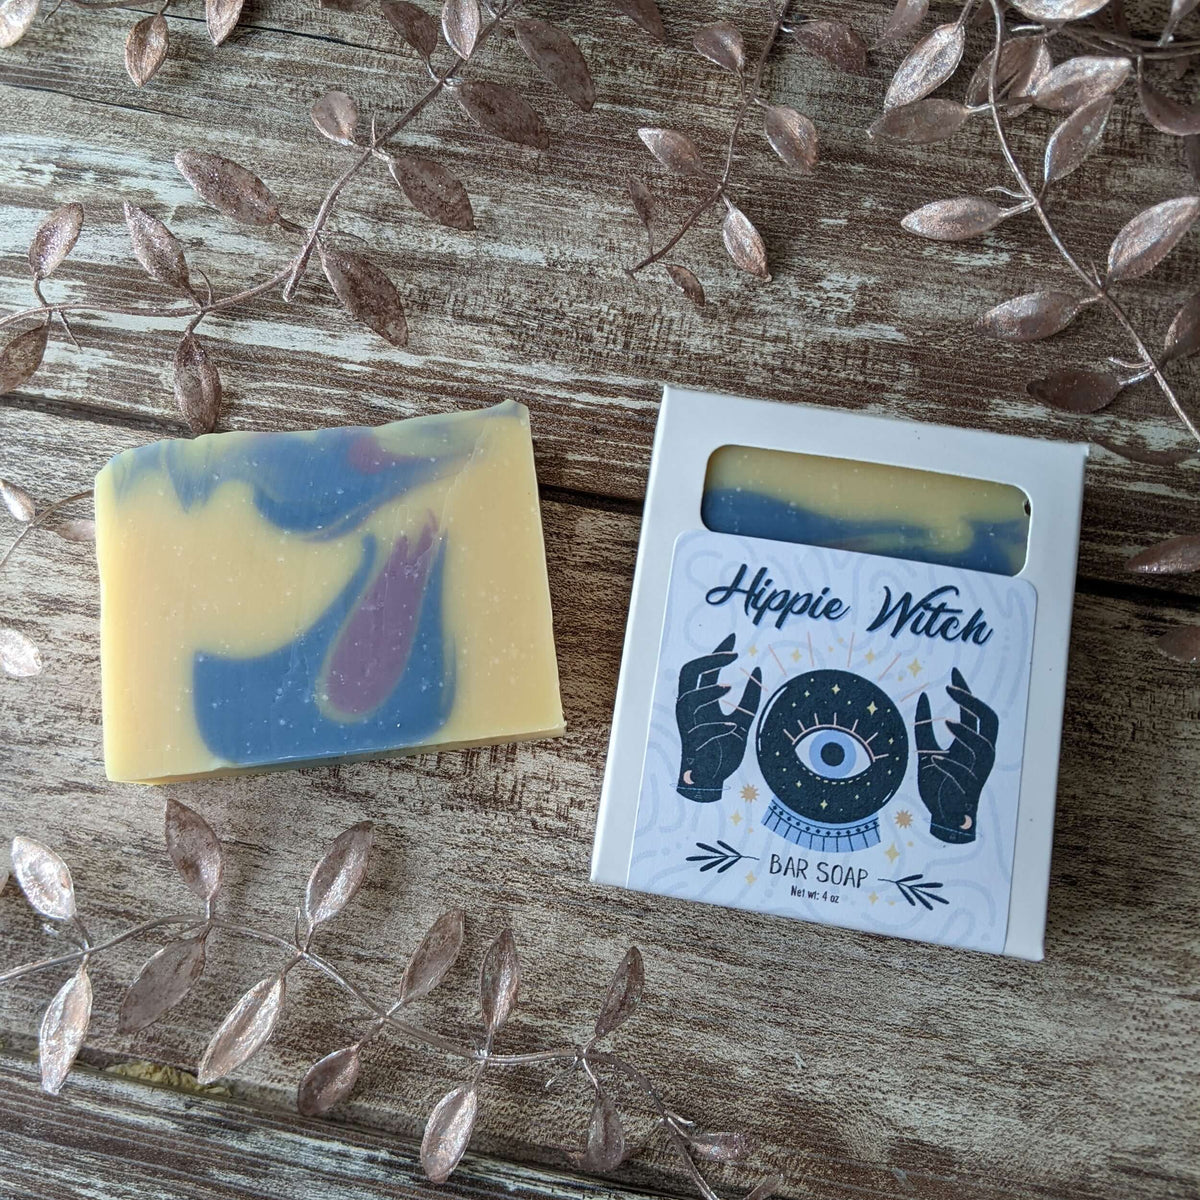 Hippie Witch Soap unboxed